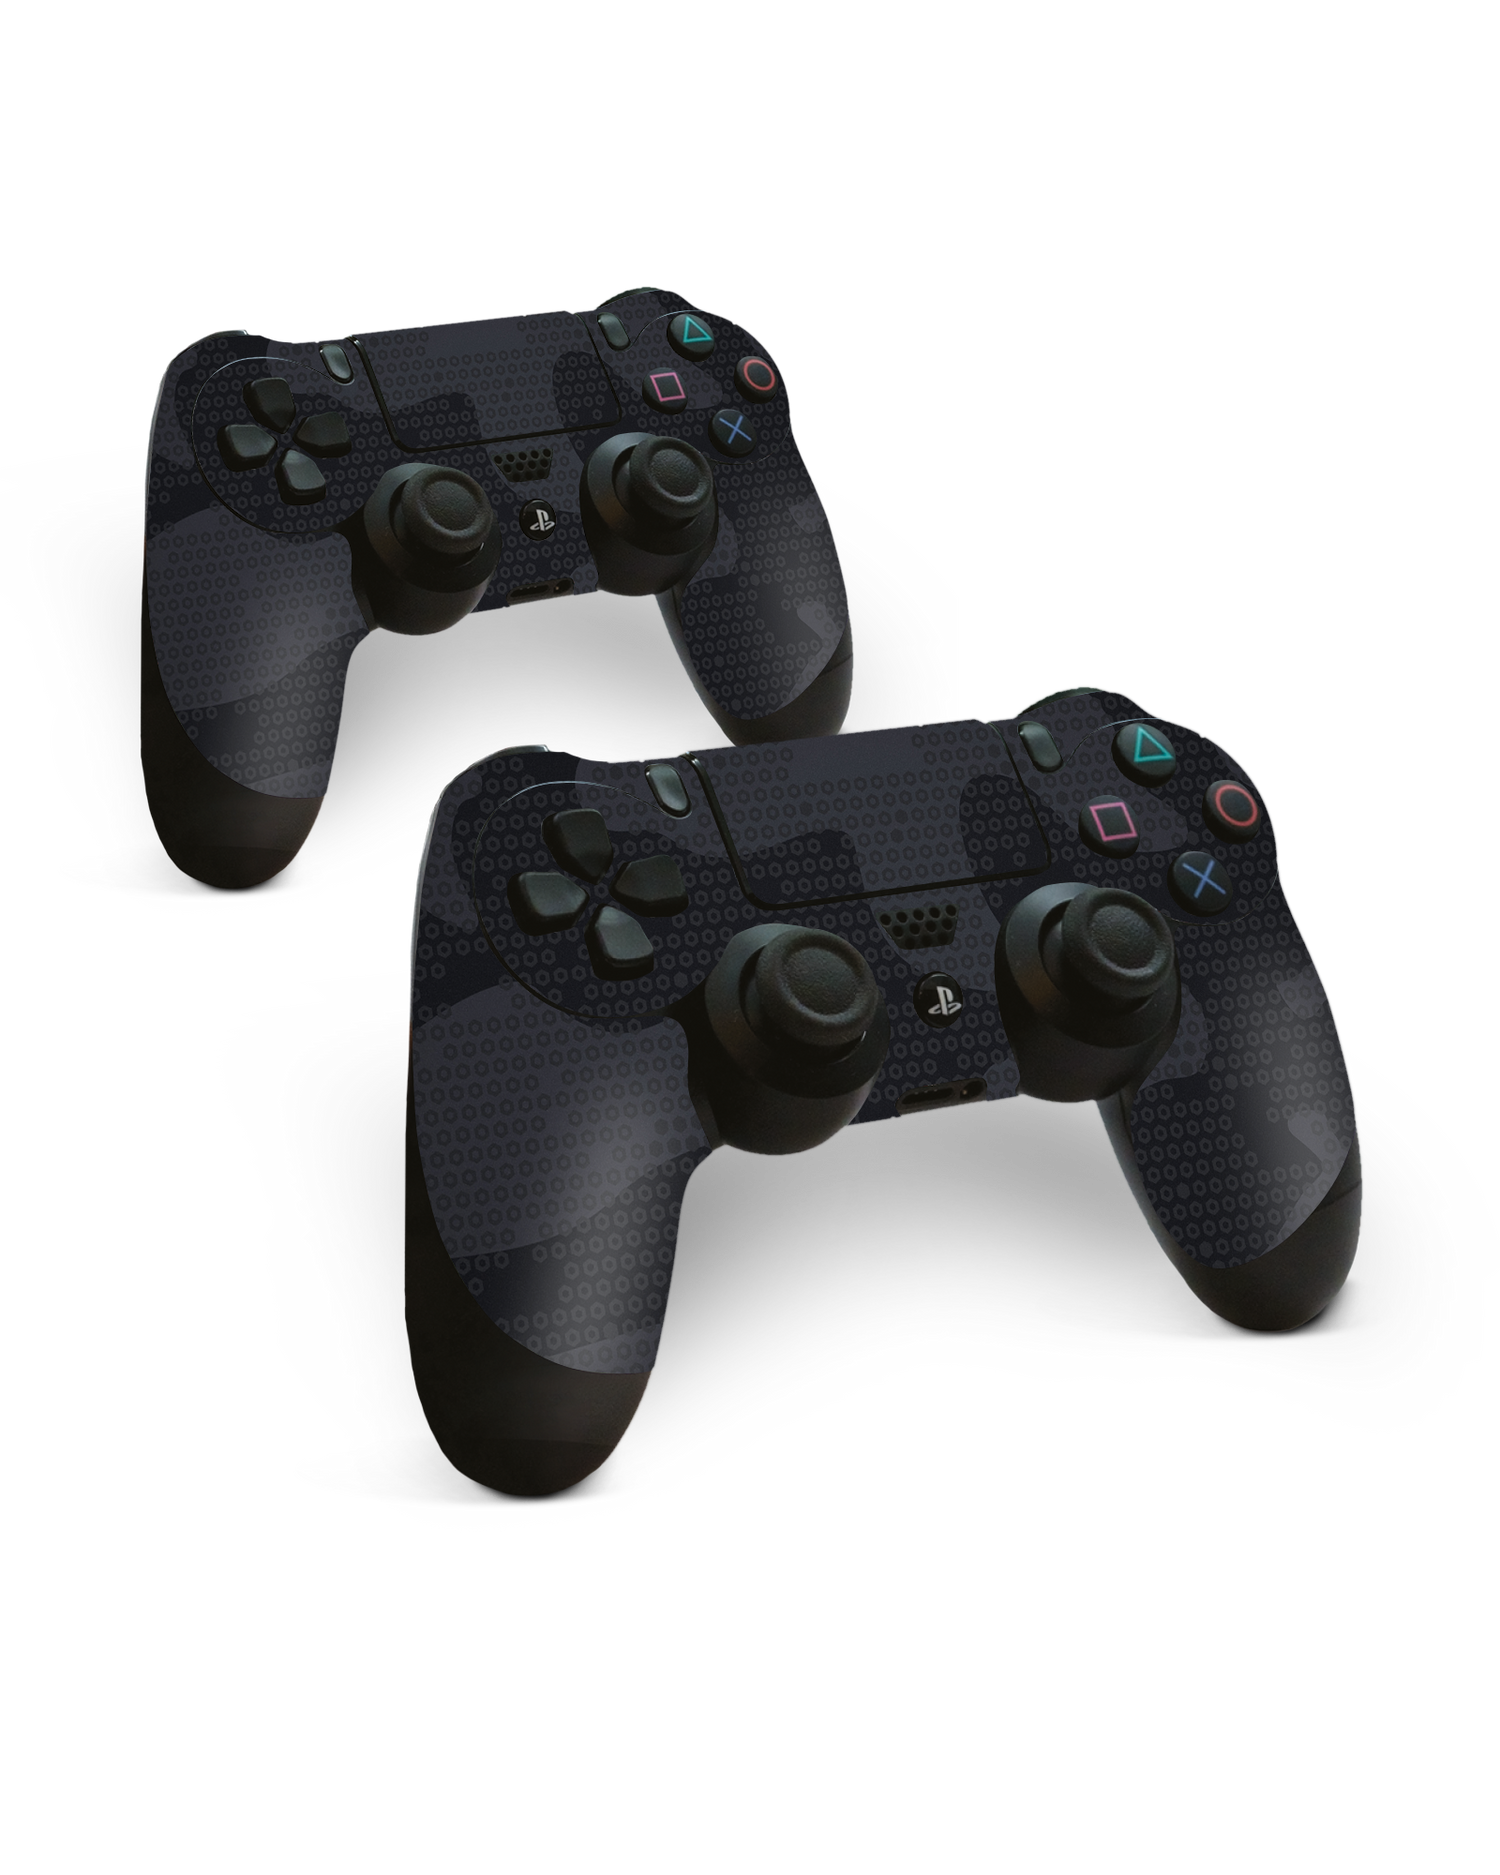 Spec Ops Dark Console Skin for Sony PlayStation 4 Controller: Side View